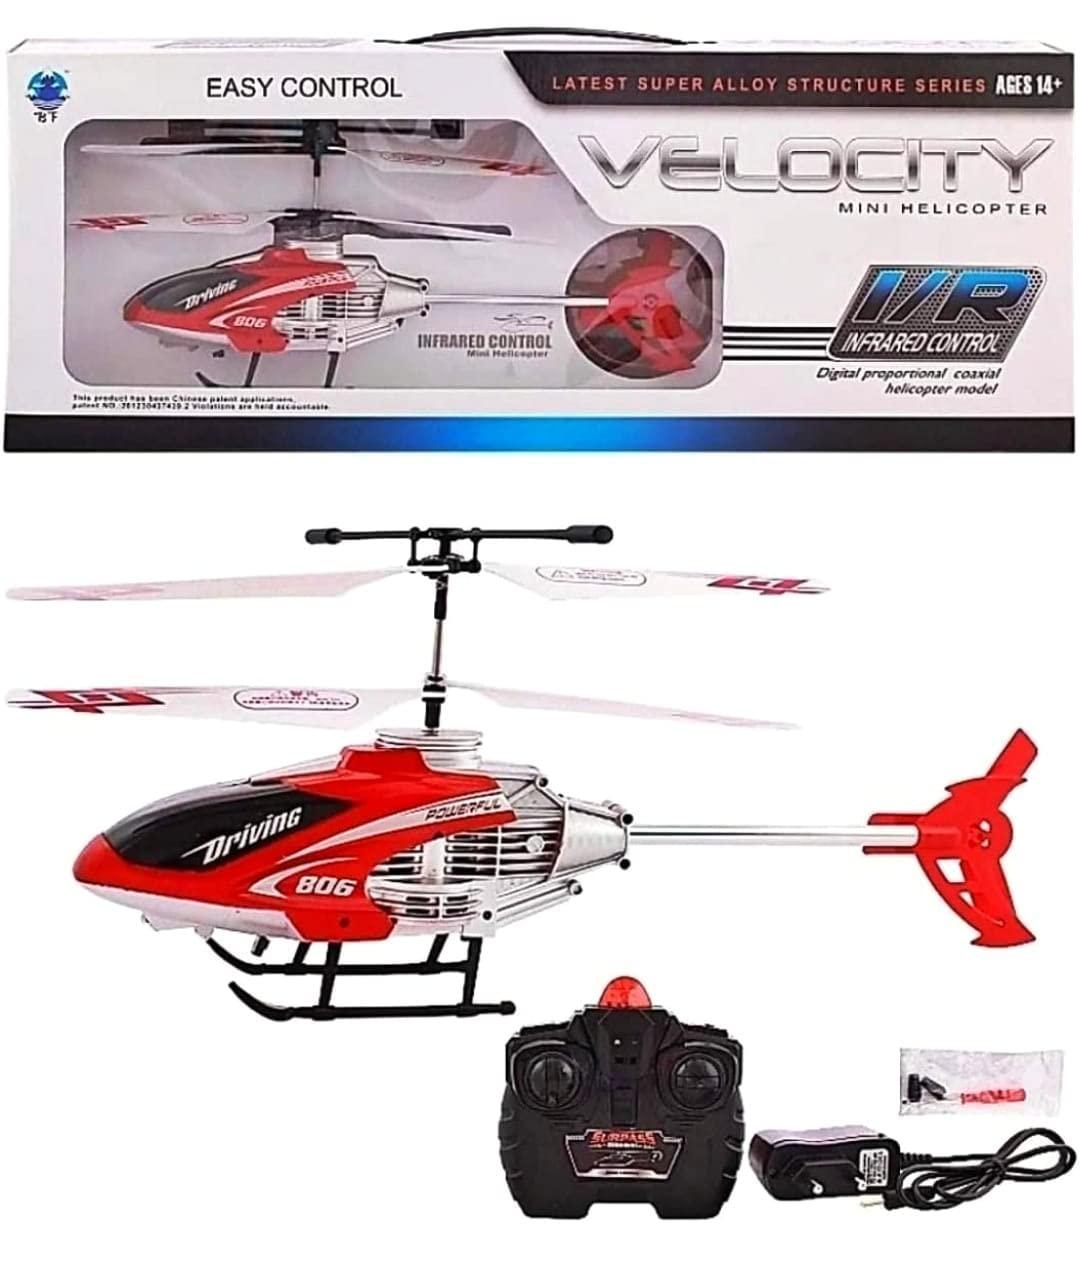 Remote Control Helicopter 100: Shopping Tips for the Remote Control Helicopter 100